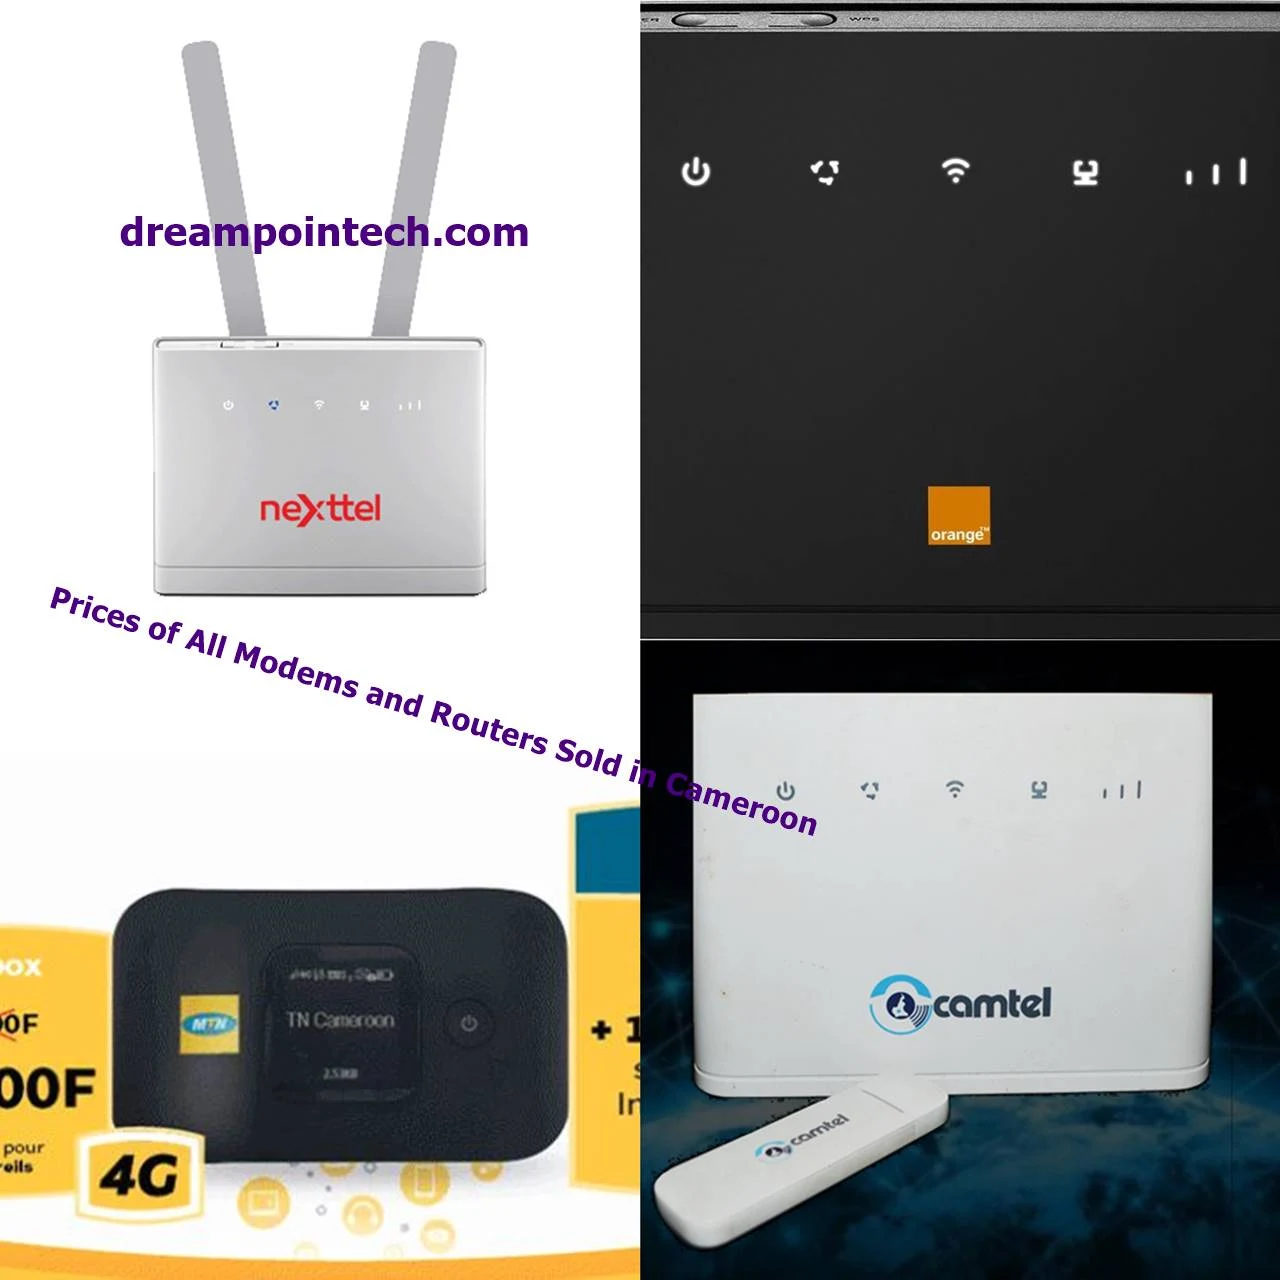 Prices of All Internet Modems and Routers Sold in Cameroon